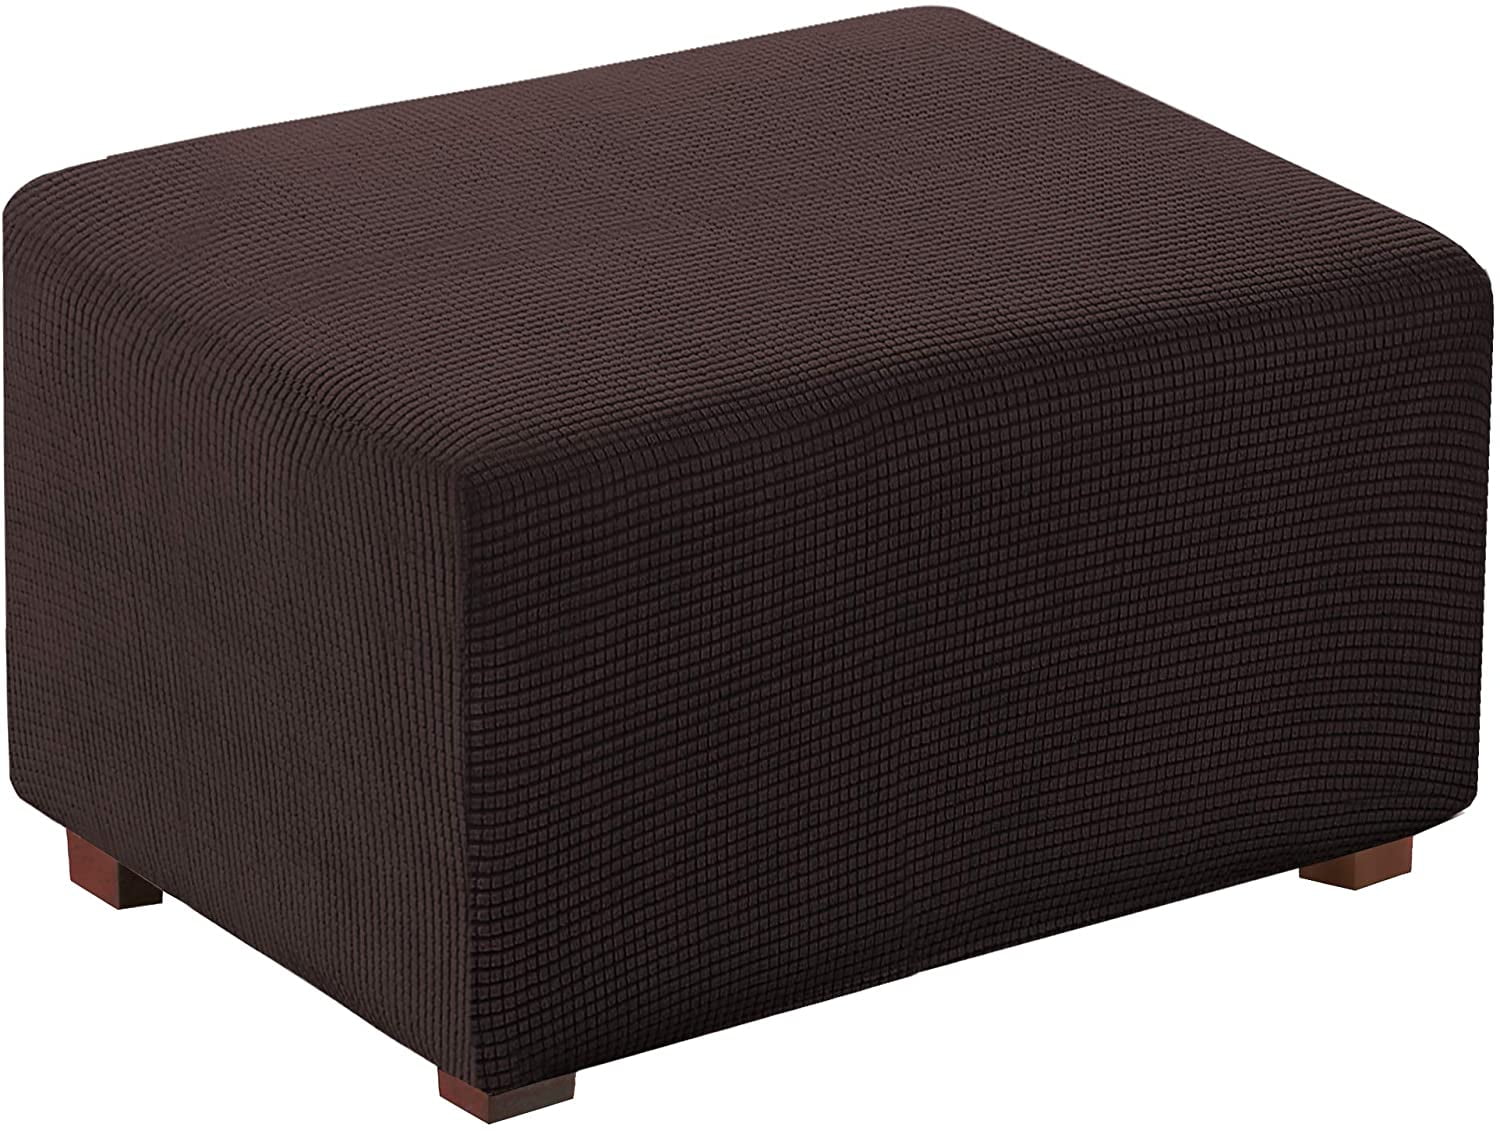 Details about   Footstool Cover Rectangle Stretch Ottoman Slipcovers Pouf Small Chair Sofa Cover 